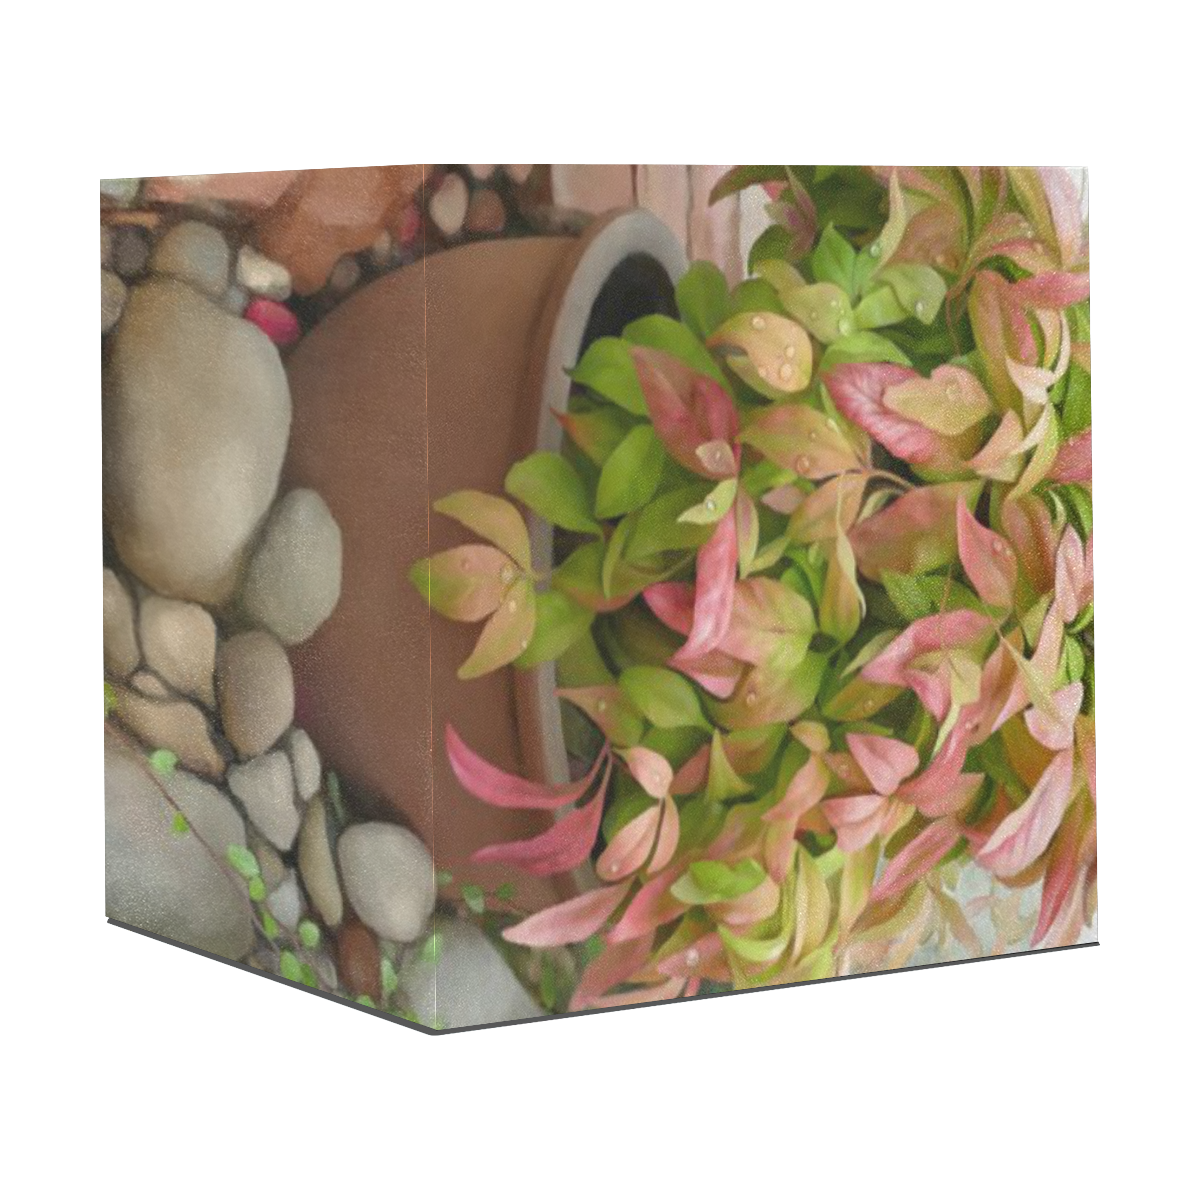 Pot full of colors, floral watercolors, plant Gift Wrapping Paper 58"x 23" (1 Roll)